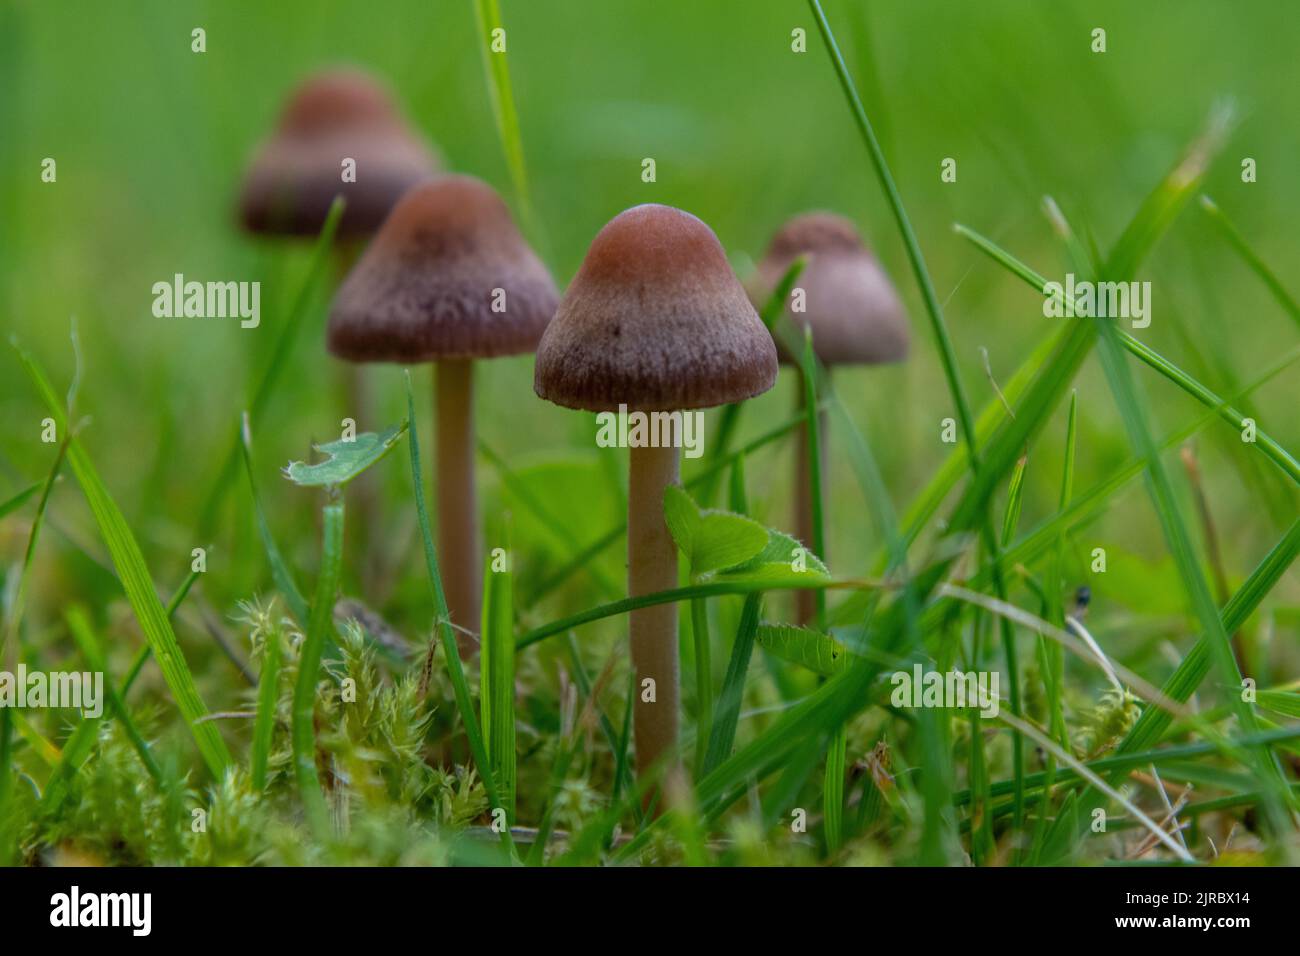 Wild mushrooms growing in the grass field. Close-up photography of little brown mushrooms in the garden. Stock Photo